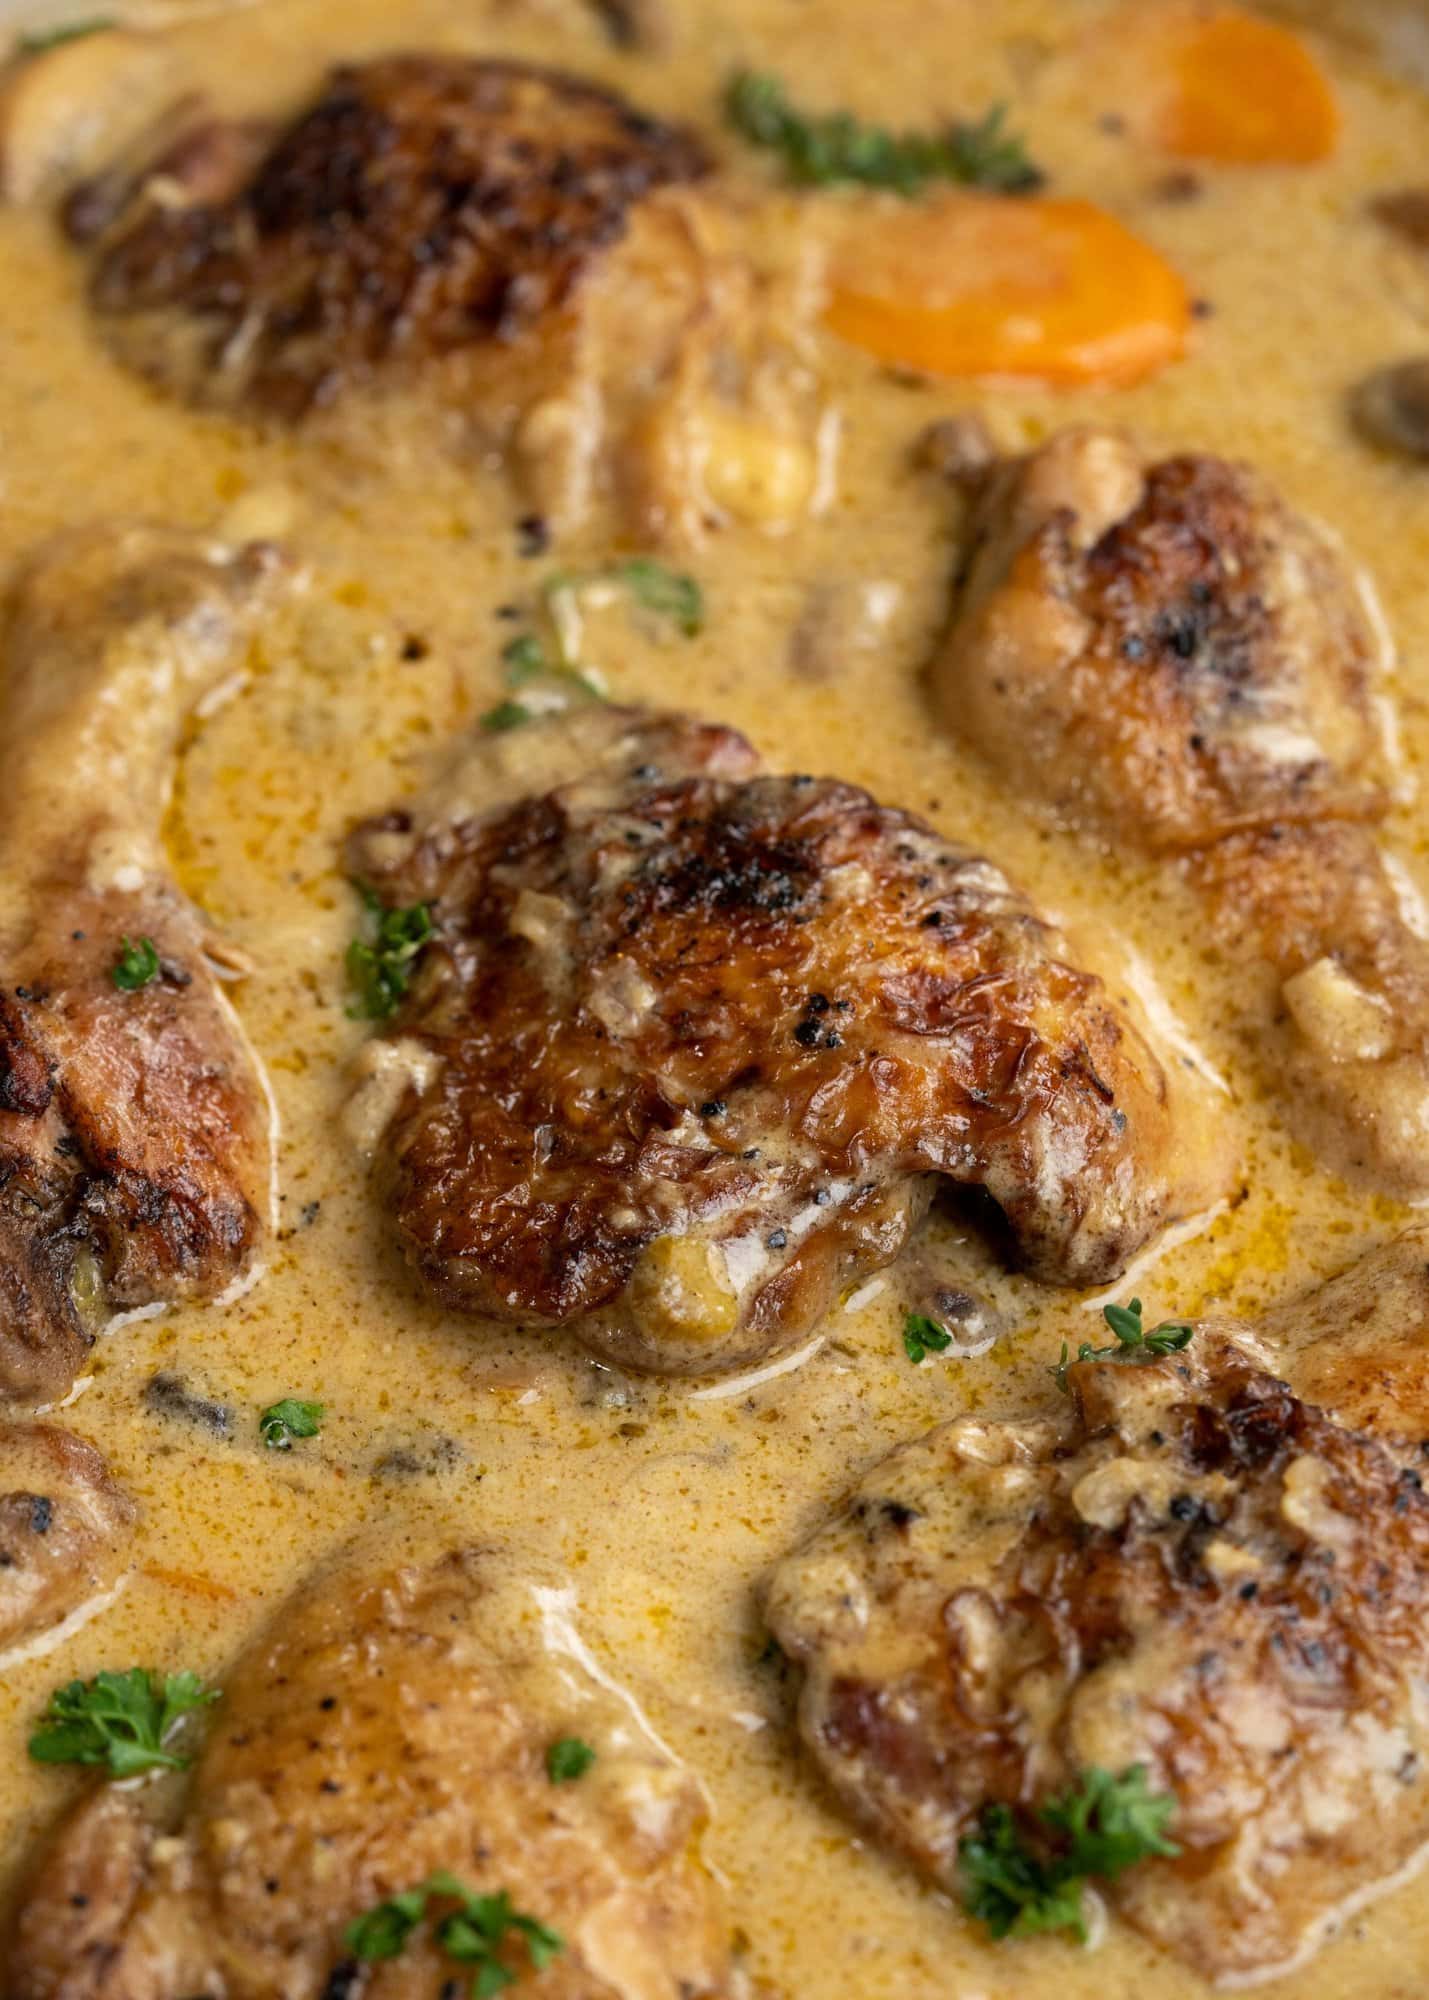 Close view of browned bone-in chicken thigh pieces with a creamy sauce packed with flavors from mushroom and stock.